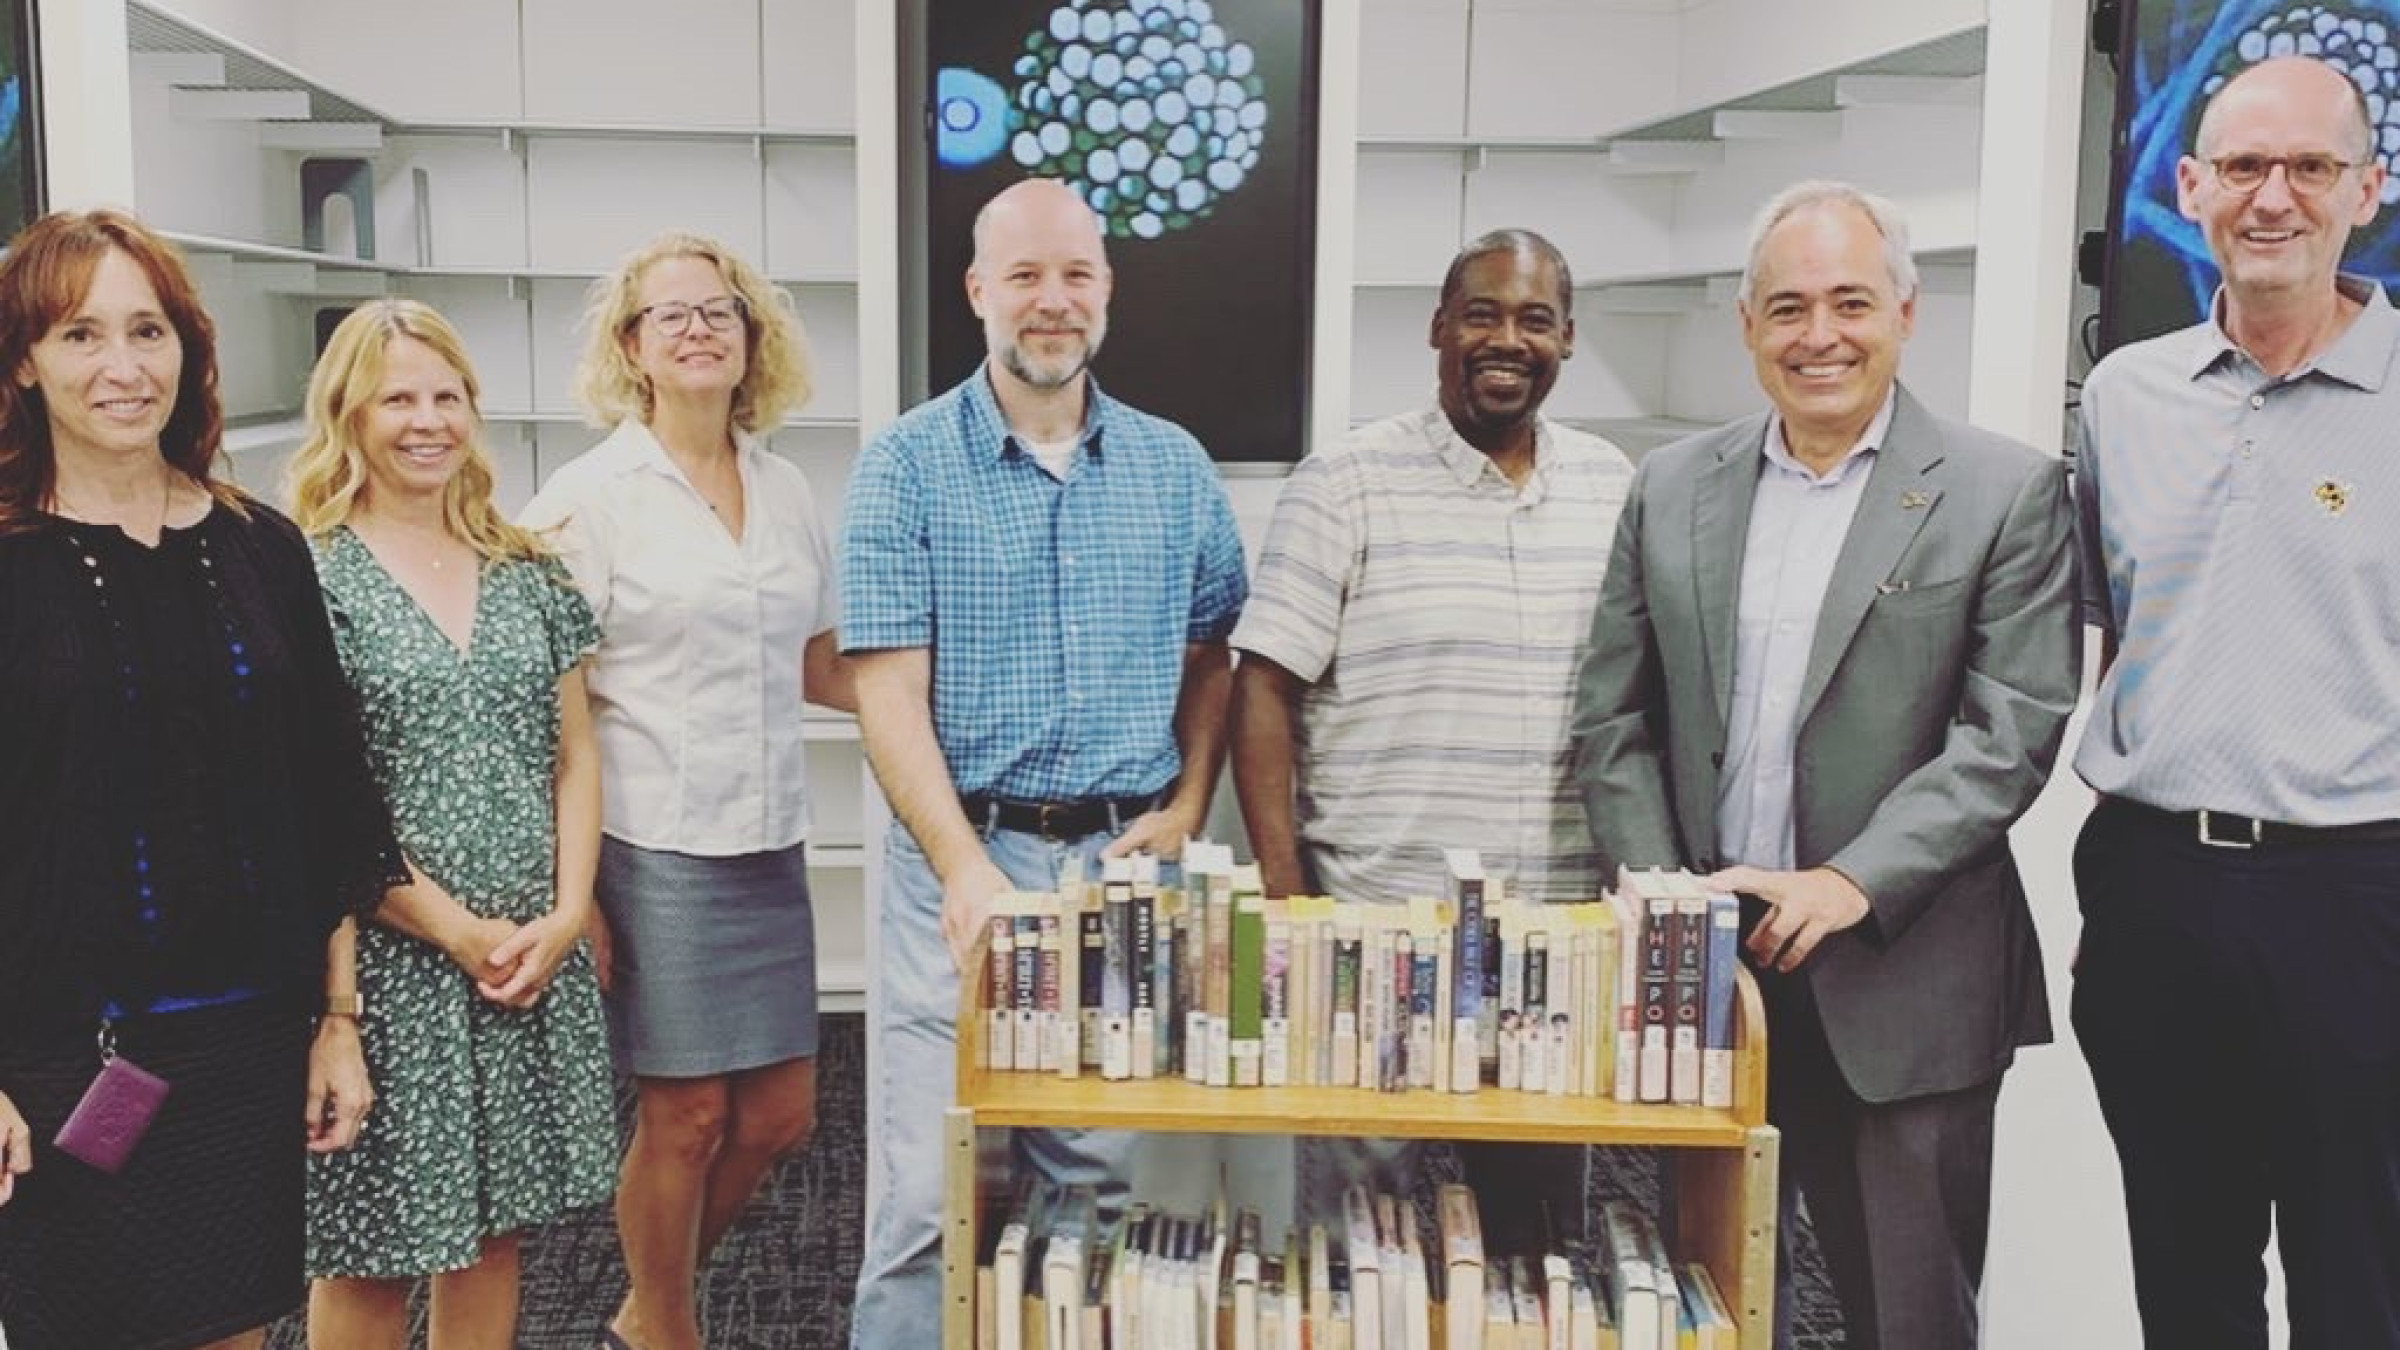 Institute and Library representatives with books